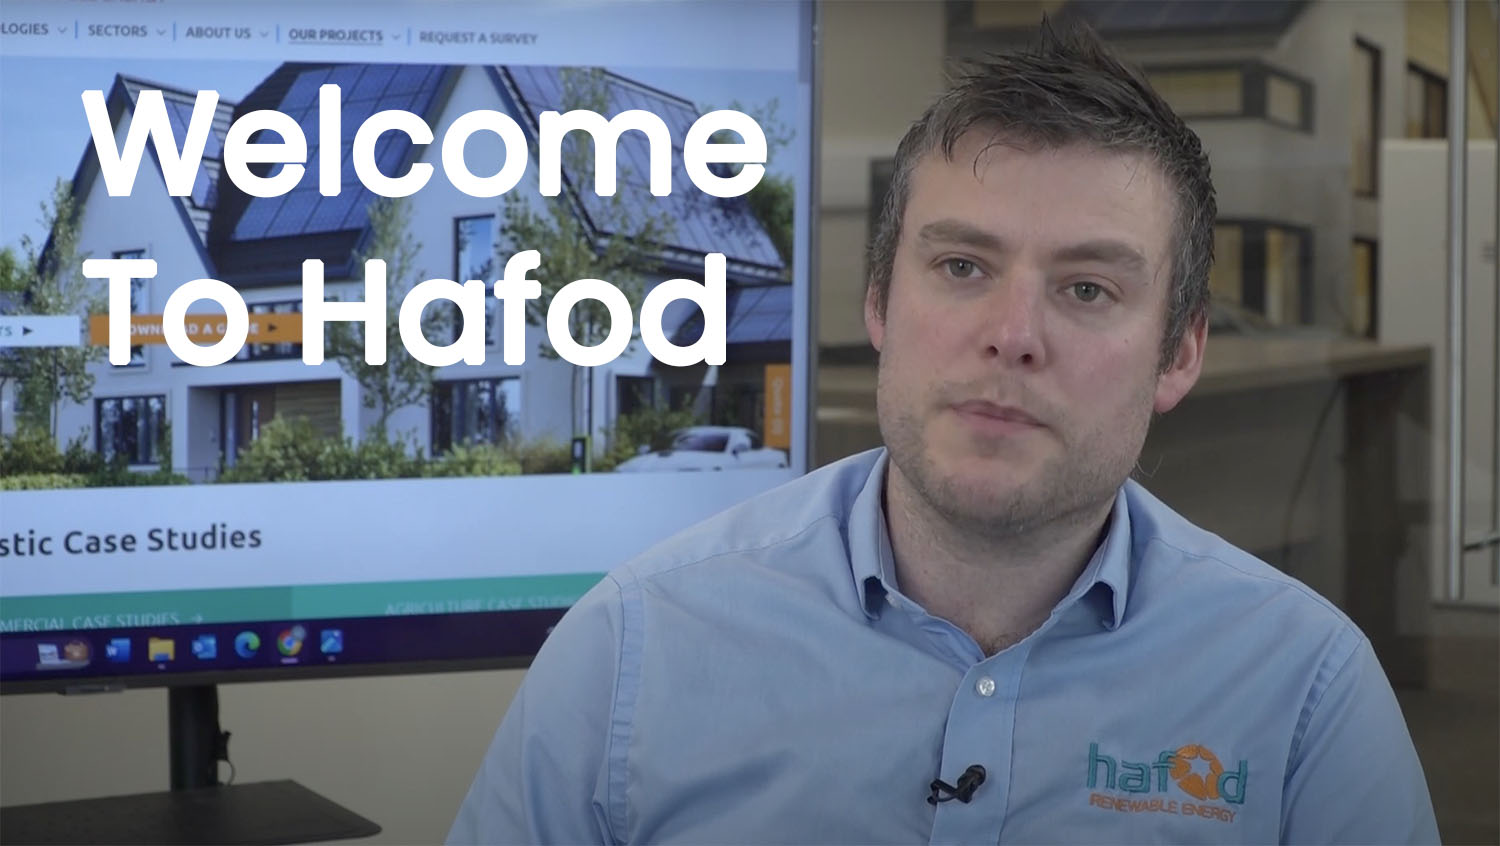 Load video: Welcome to Hafod Renewables